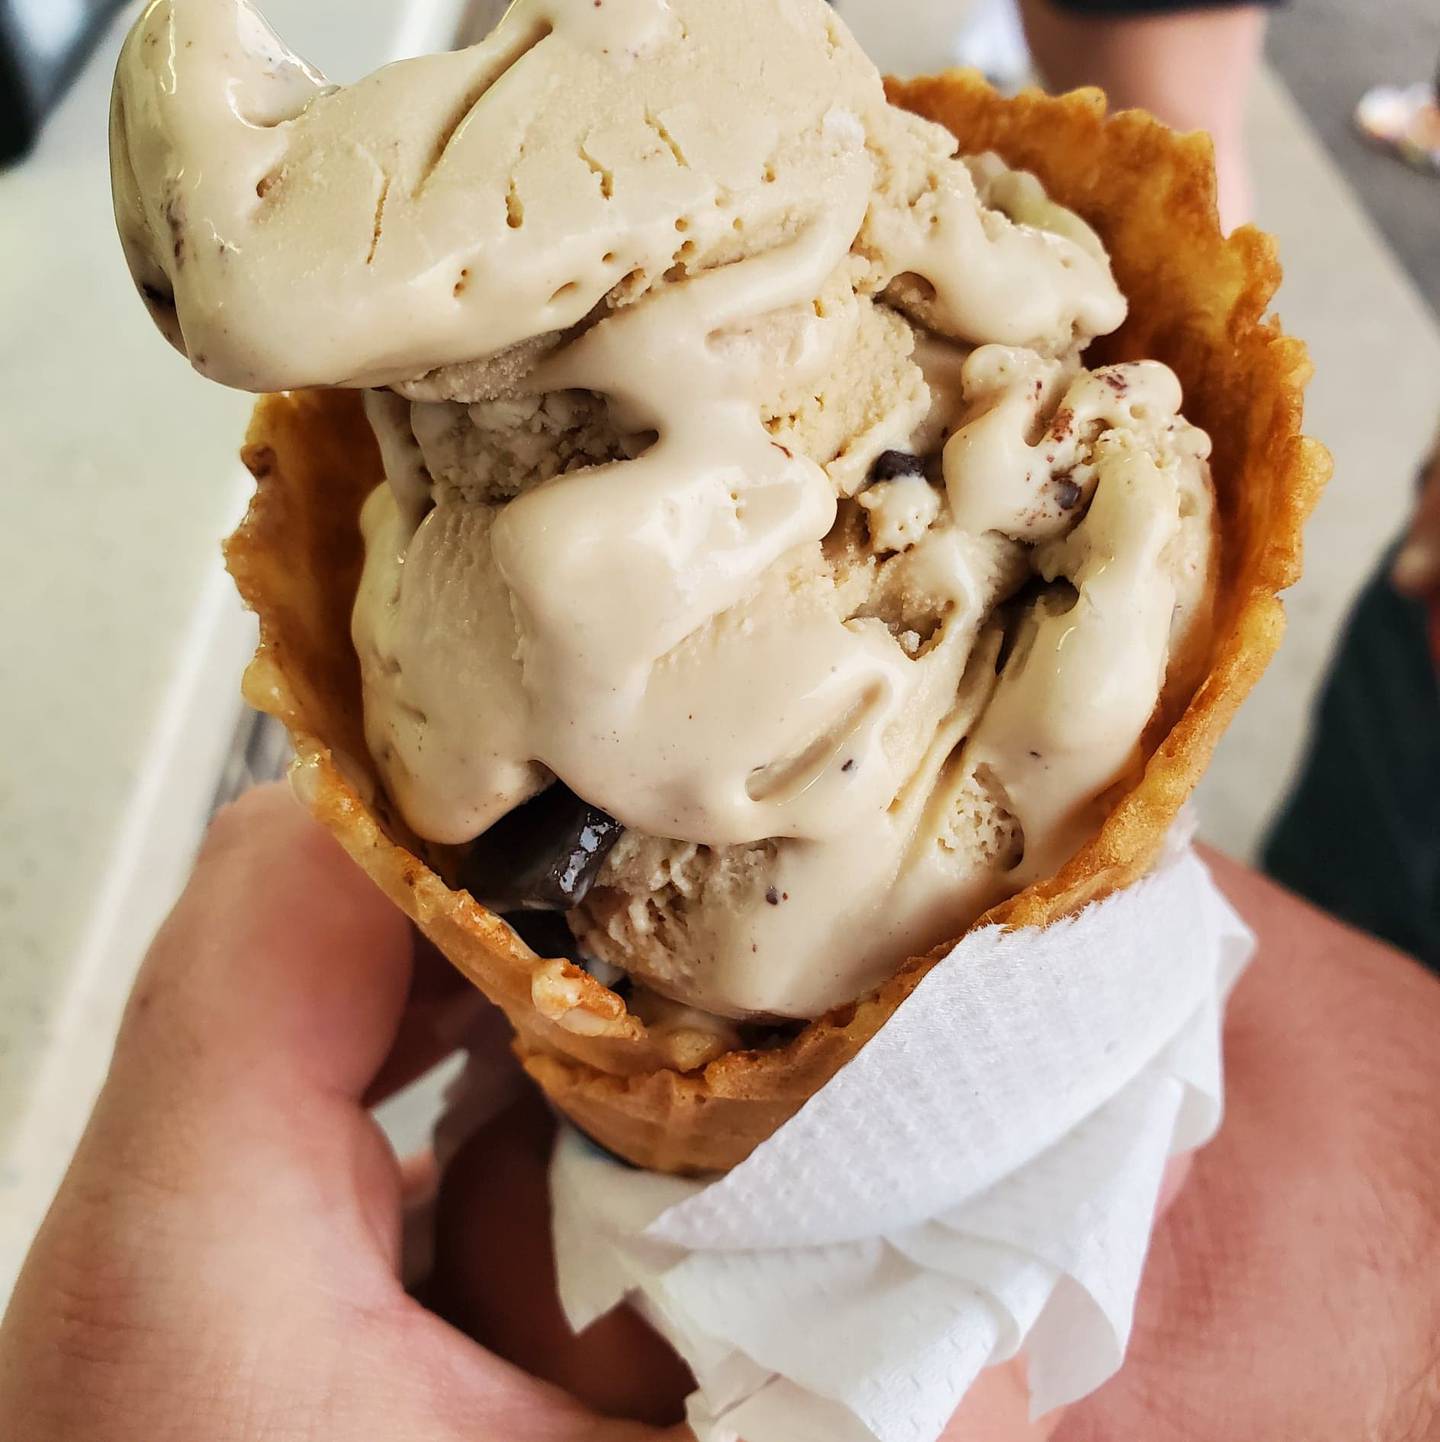 The “Exhausted Parent" parent at Minooka Creamery was bourbon-spiked espresso ice cream swirled with bittersweet chocolate chunks.